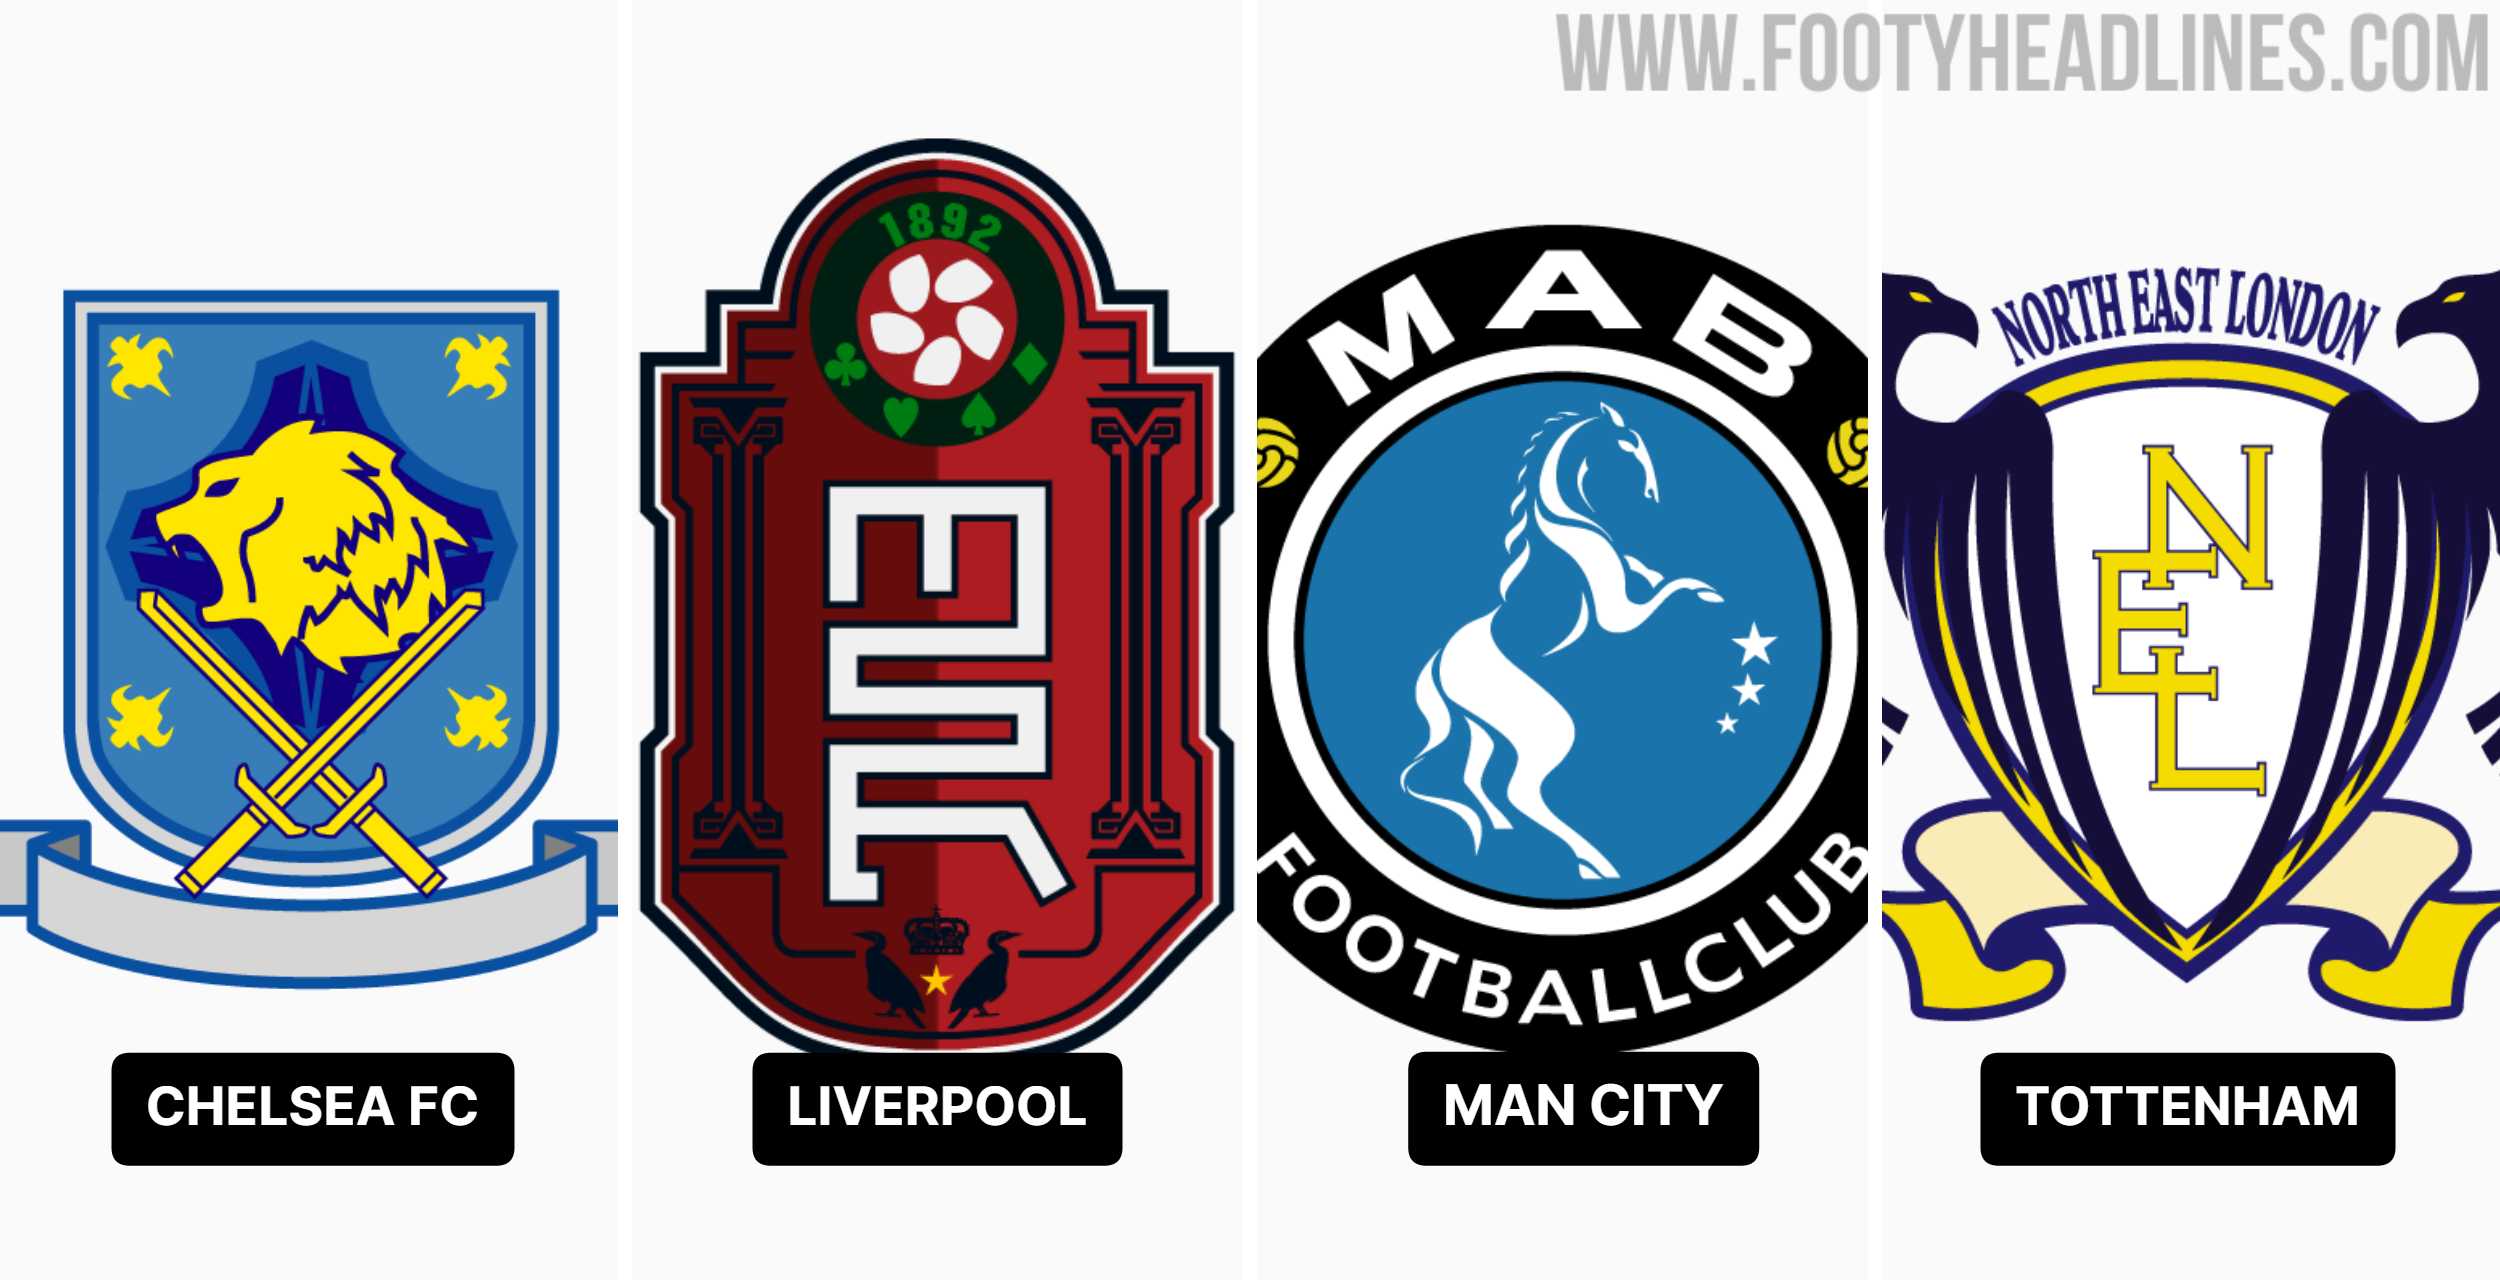 All the fake logos designed by Konami for the Premier League